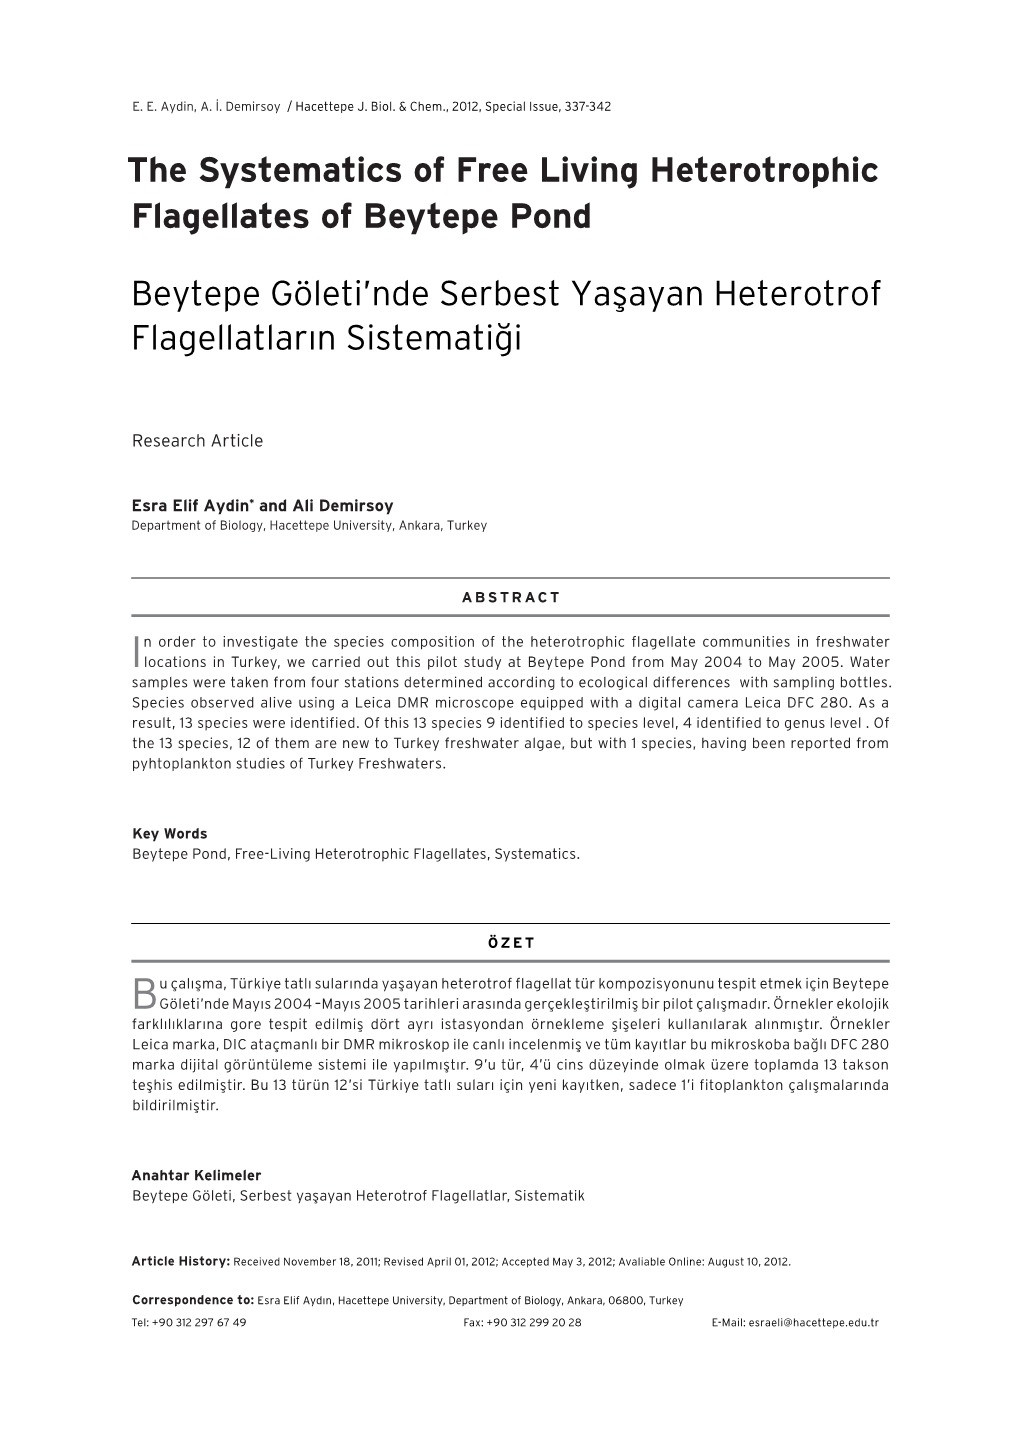 The Systematics of Free Living Heterotrophic Flagellates of Beytepe Pond